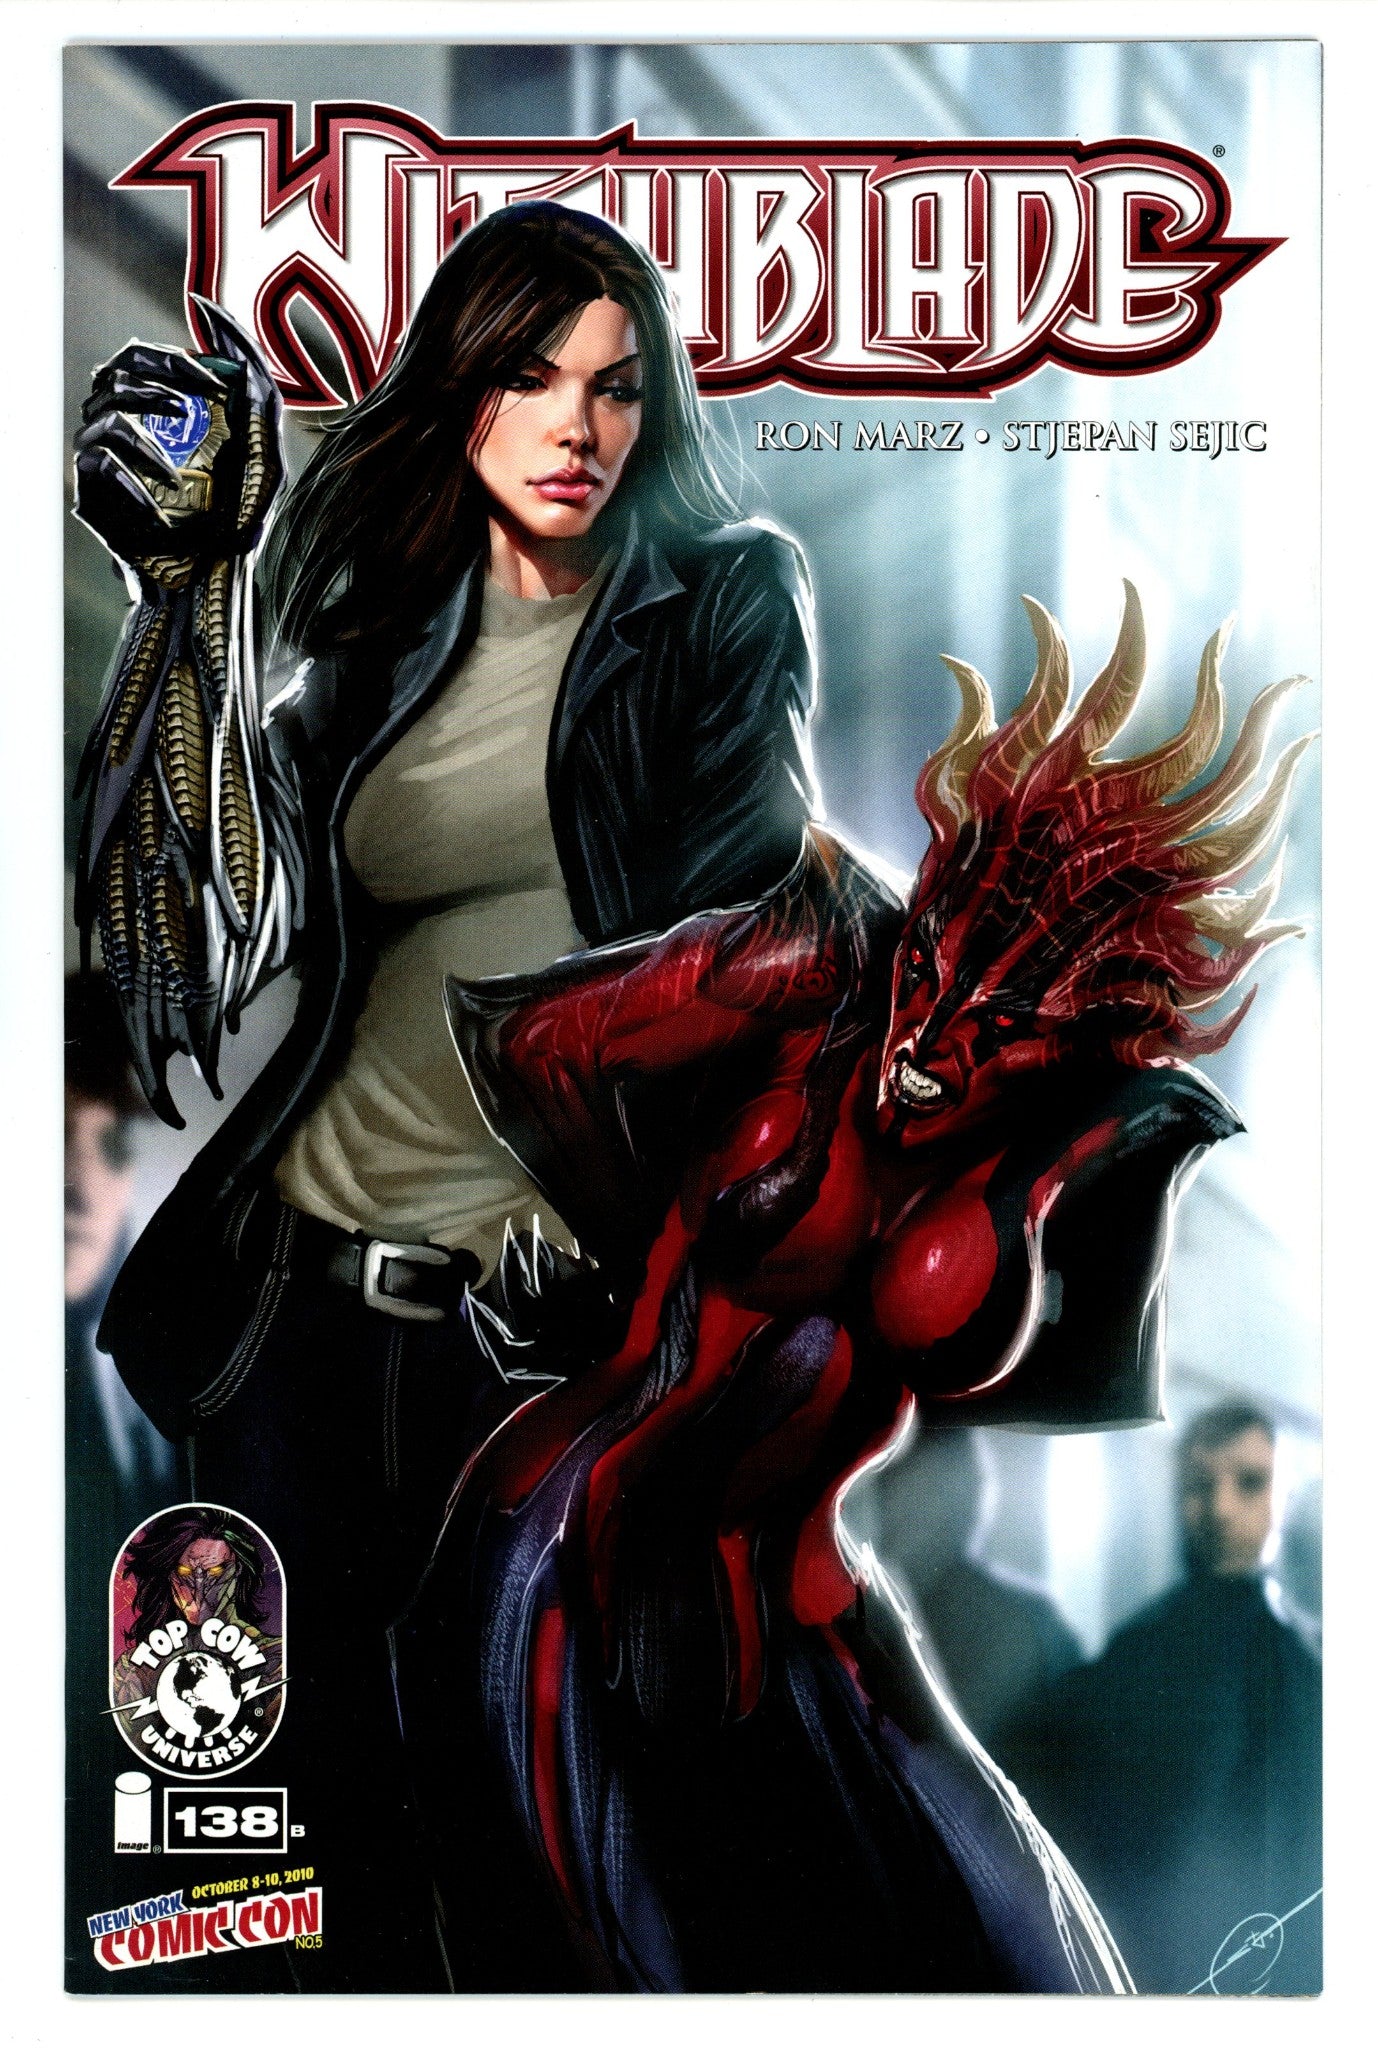 Witchblade Vol 1 138 VF/NM (9.0) (2010) Sejic Exclusive Variant 